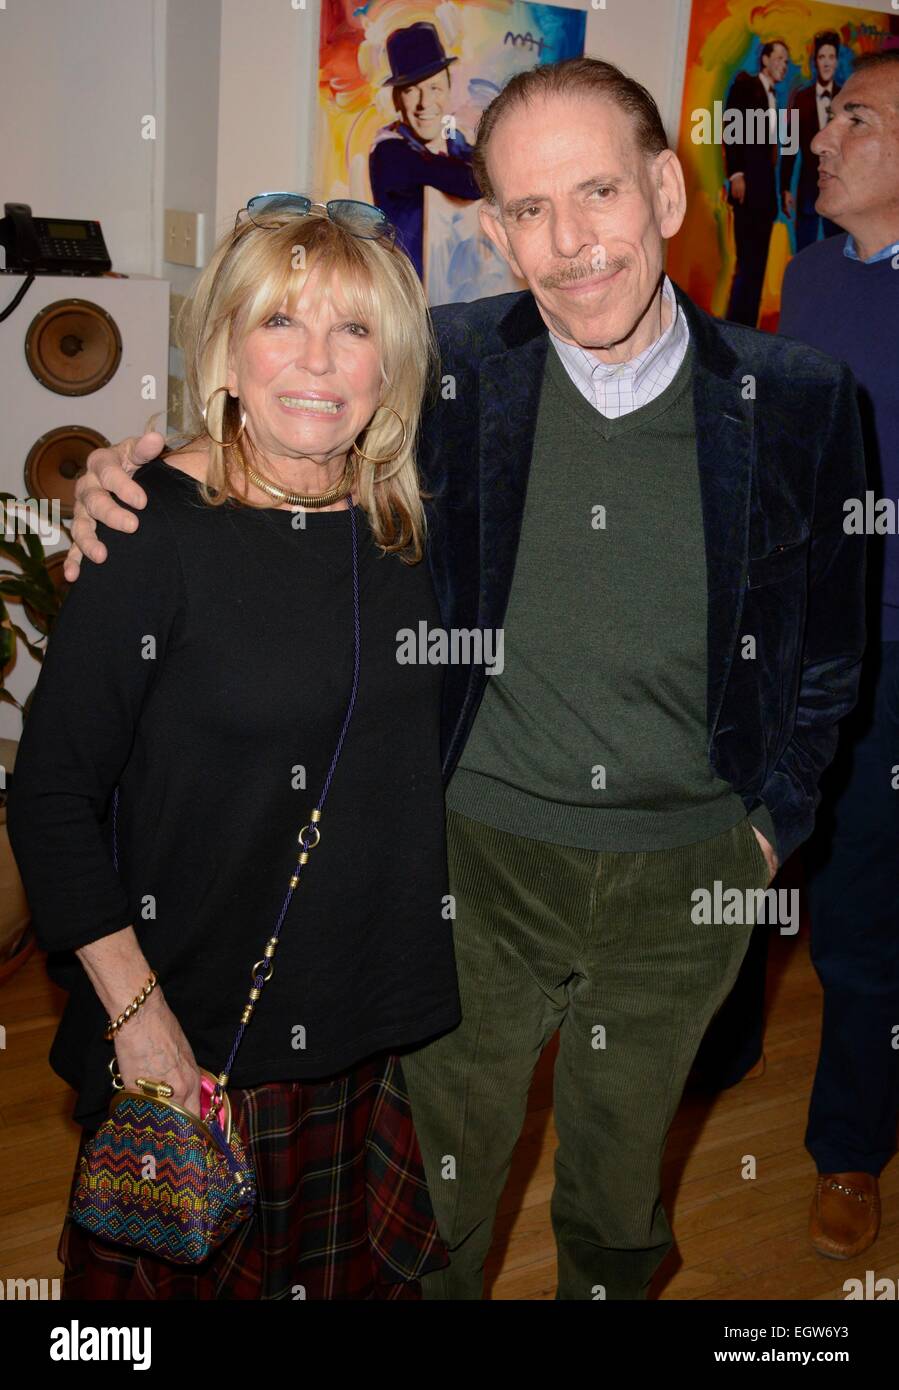 New York, NY, USA. 2nd Mar, 2015. Peter Max, Nancy Sinatra at arrivals for Unveiling of New Paintings by Peter Max for Centennial of Frank Sinatra's Birthday, Peter Max studio, New York, NY March 2, 2015. Credit:  Derek Storm/Everett Collection/Alamy Live News Stock Photo